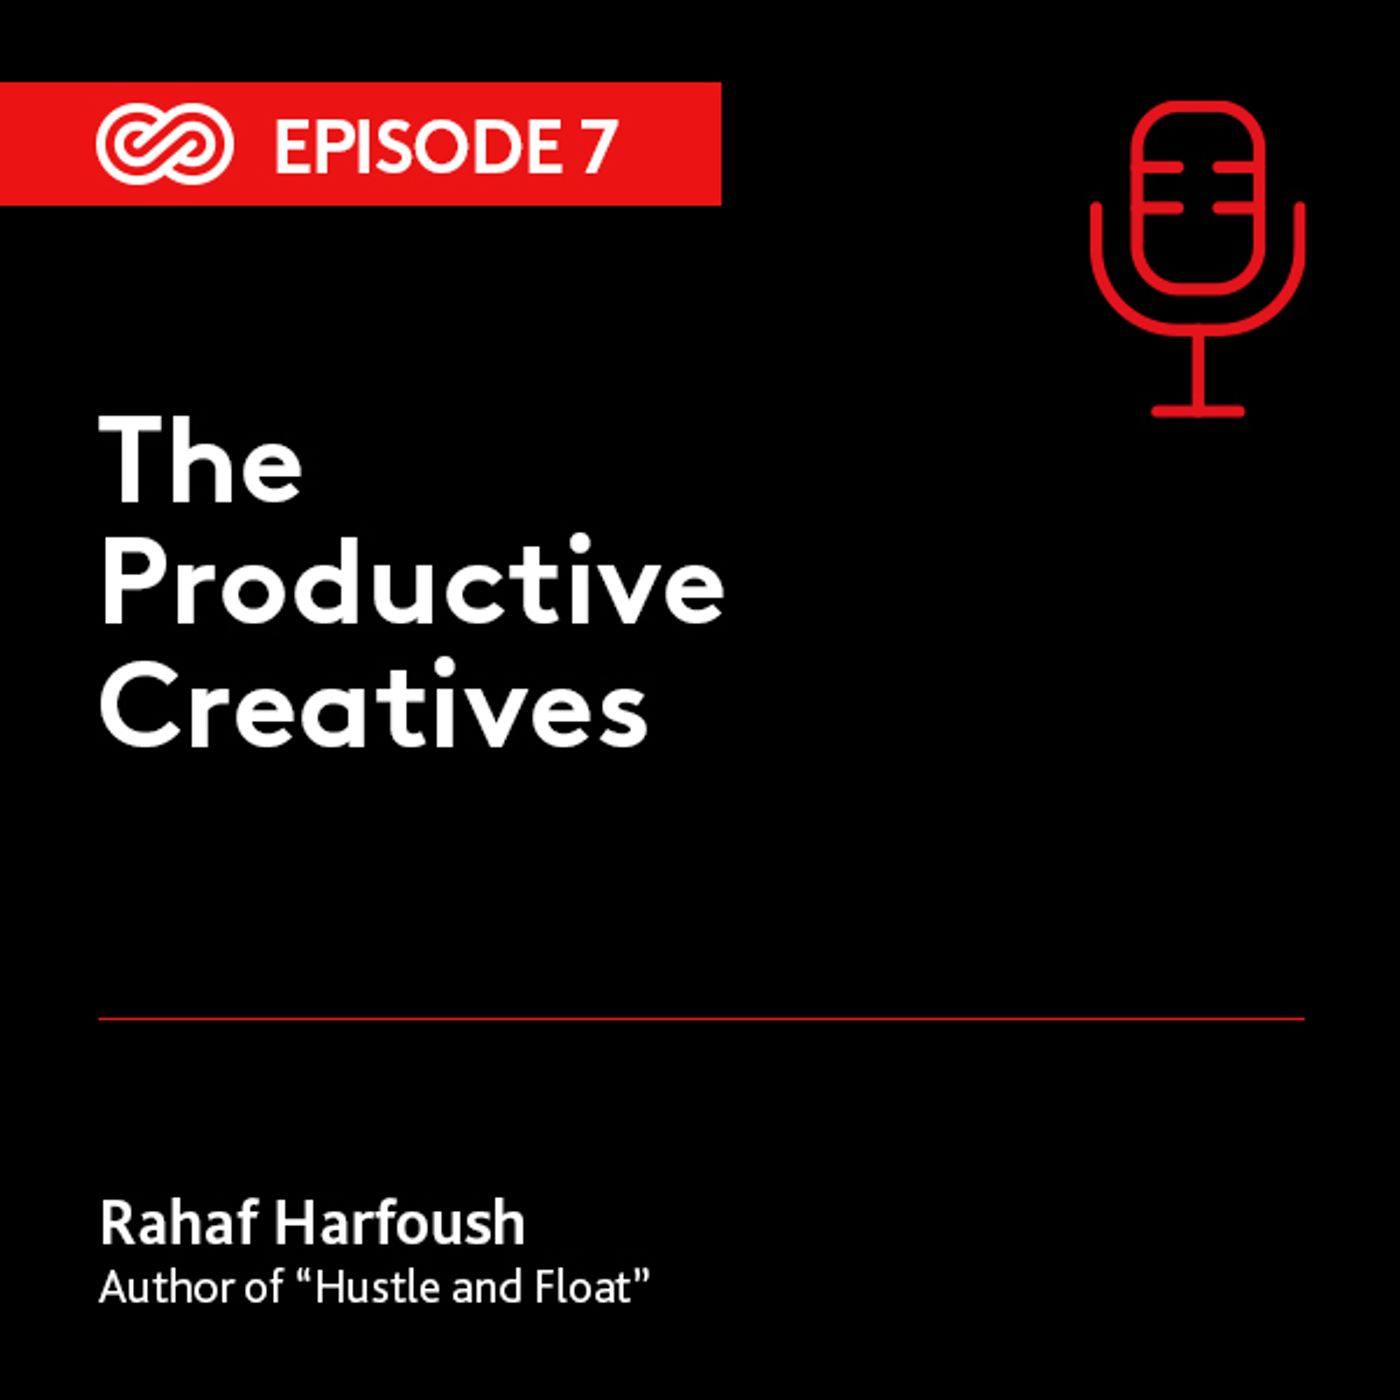 7 - The Productive Creatives